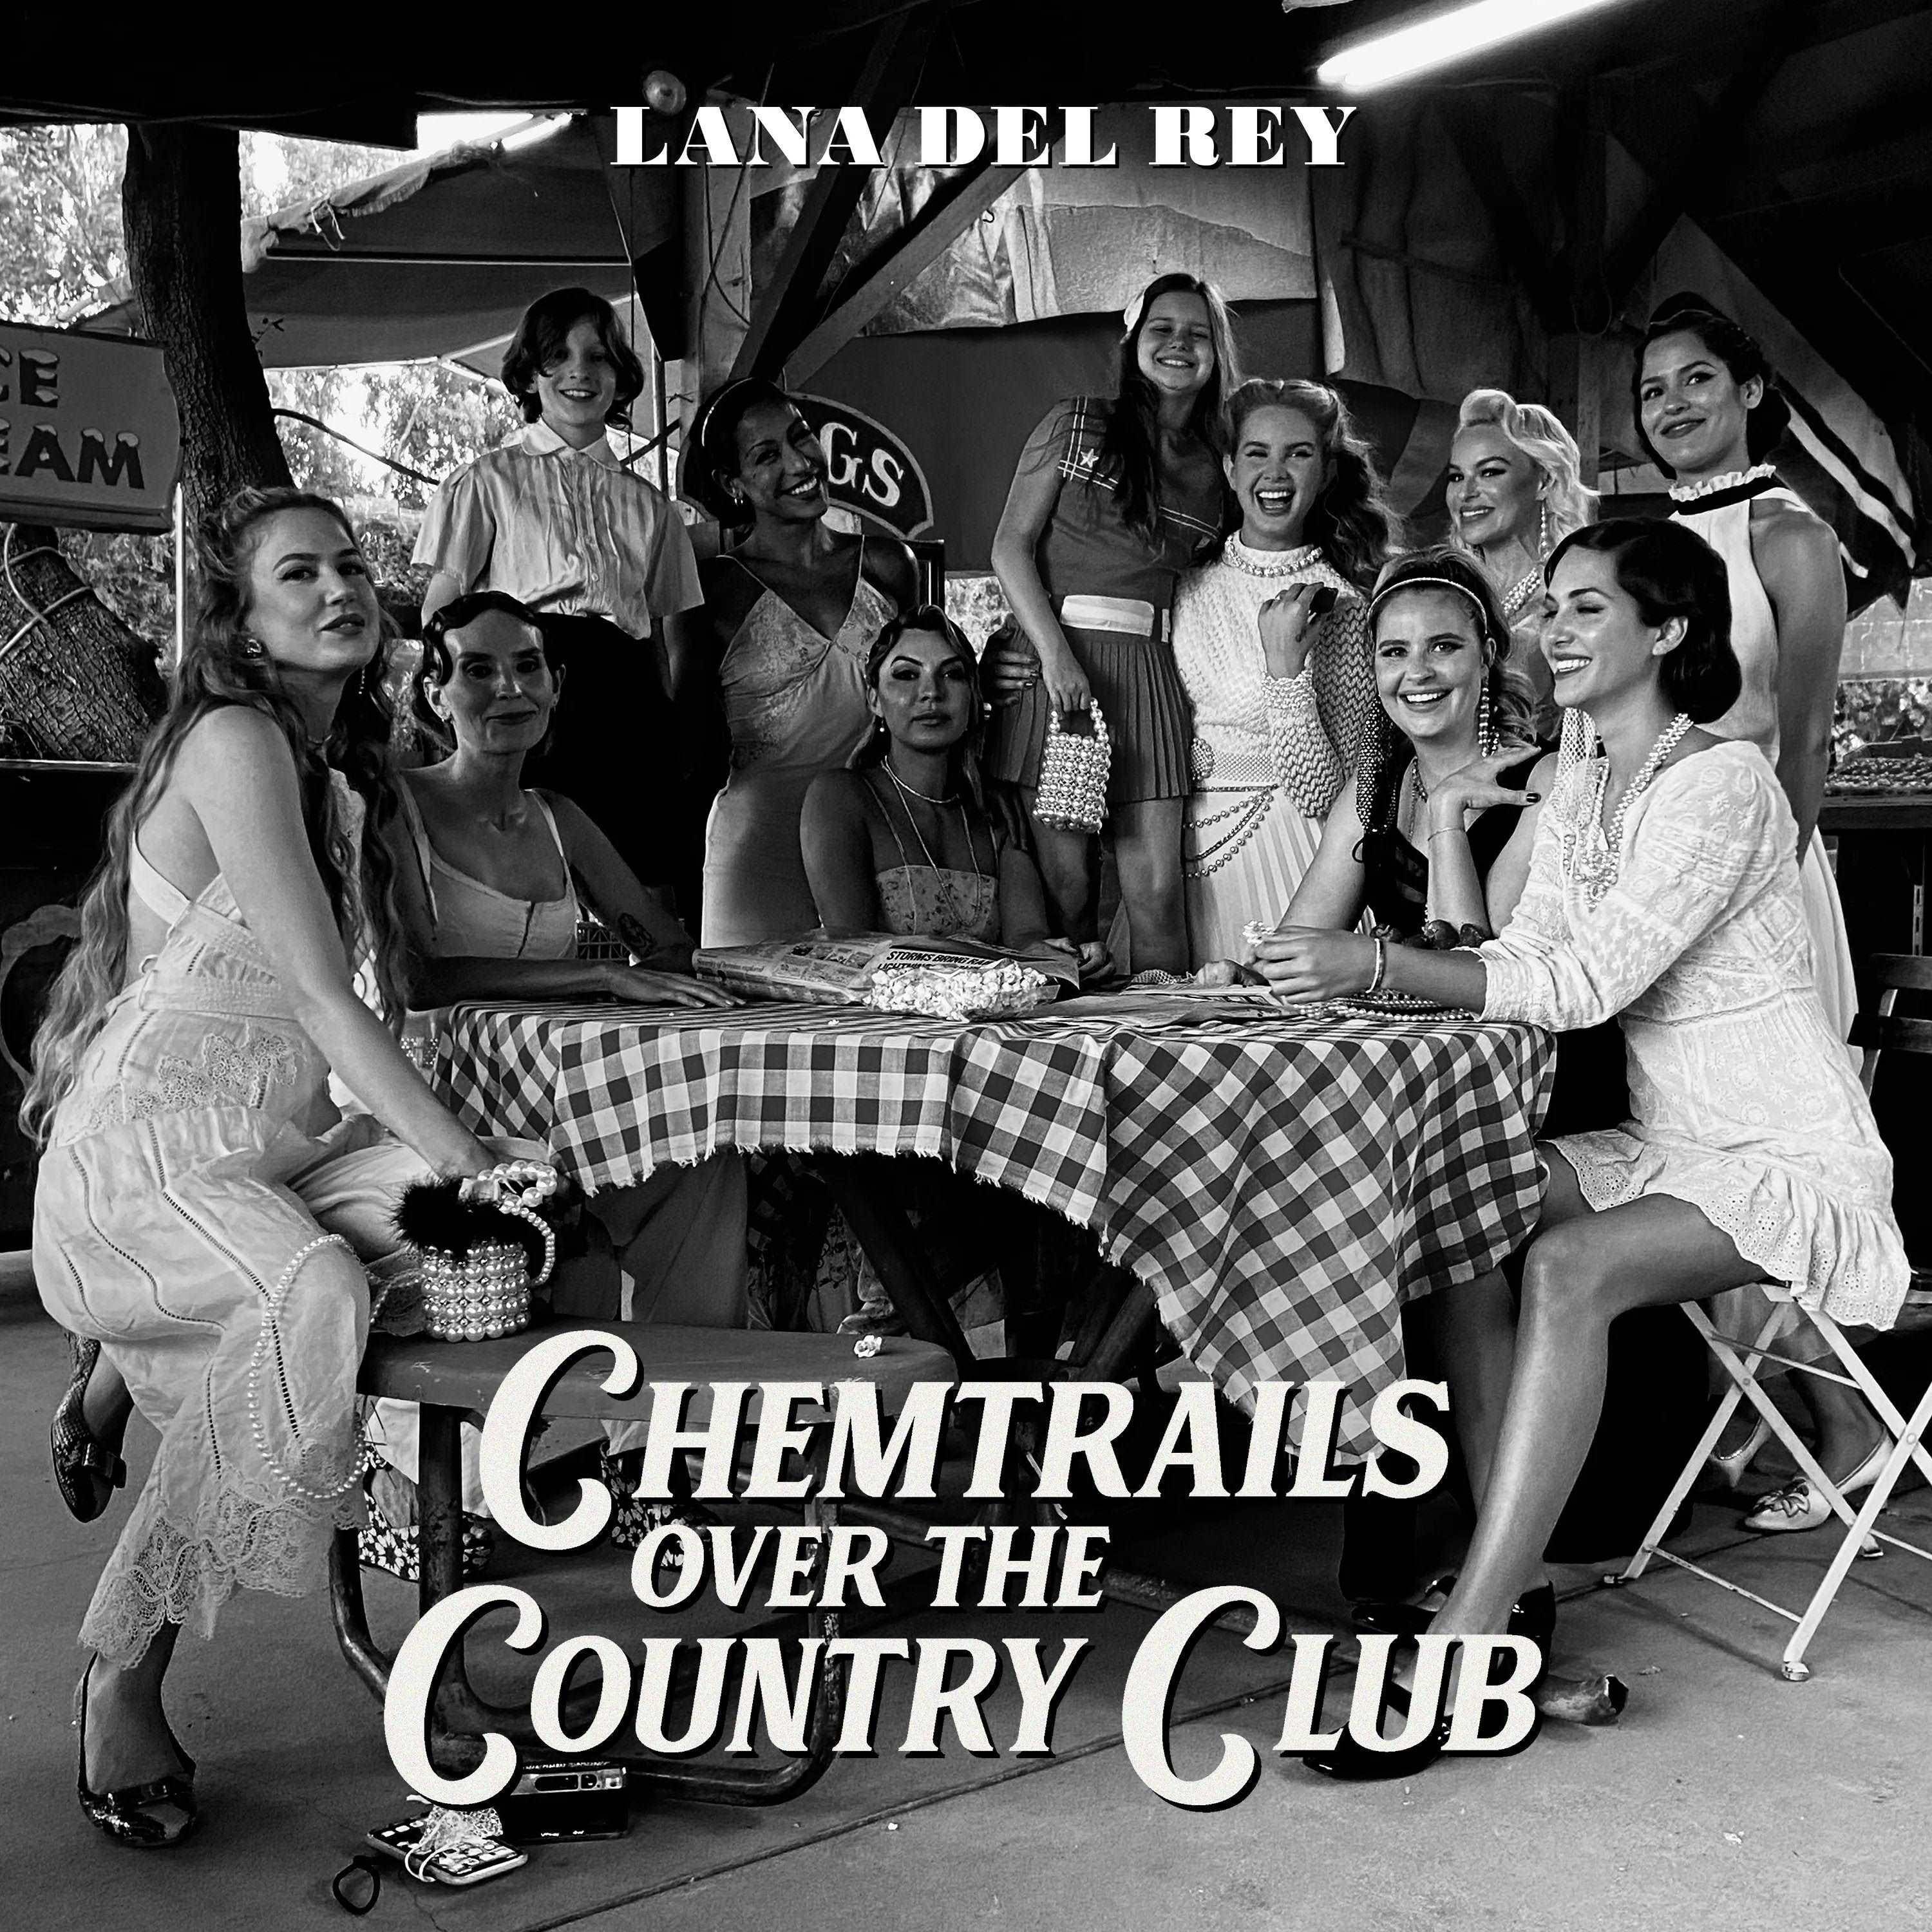 LANA DEL REY - Chemtrails Over the Country Club Vinyl - JWrayRecords